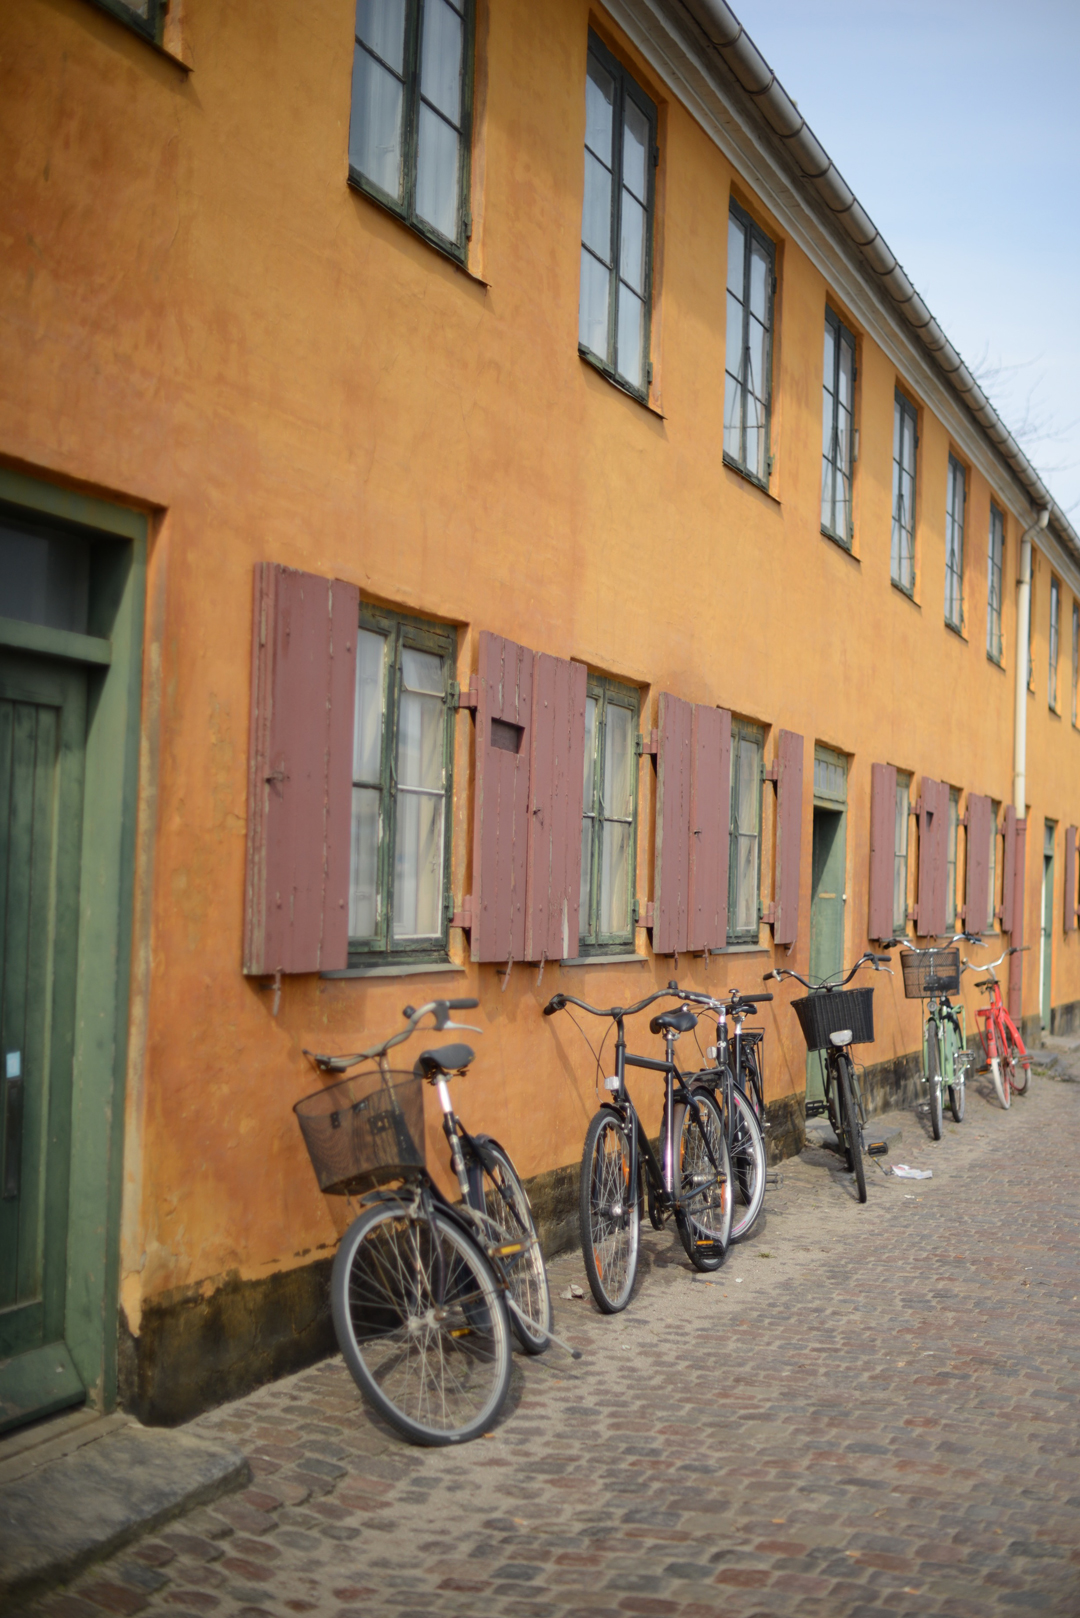 postcard from Copenhagen photographed by stylist and fashion blogger sara delaney